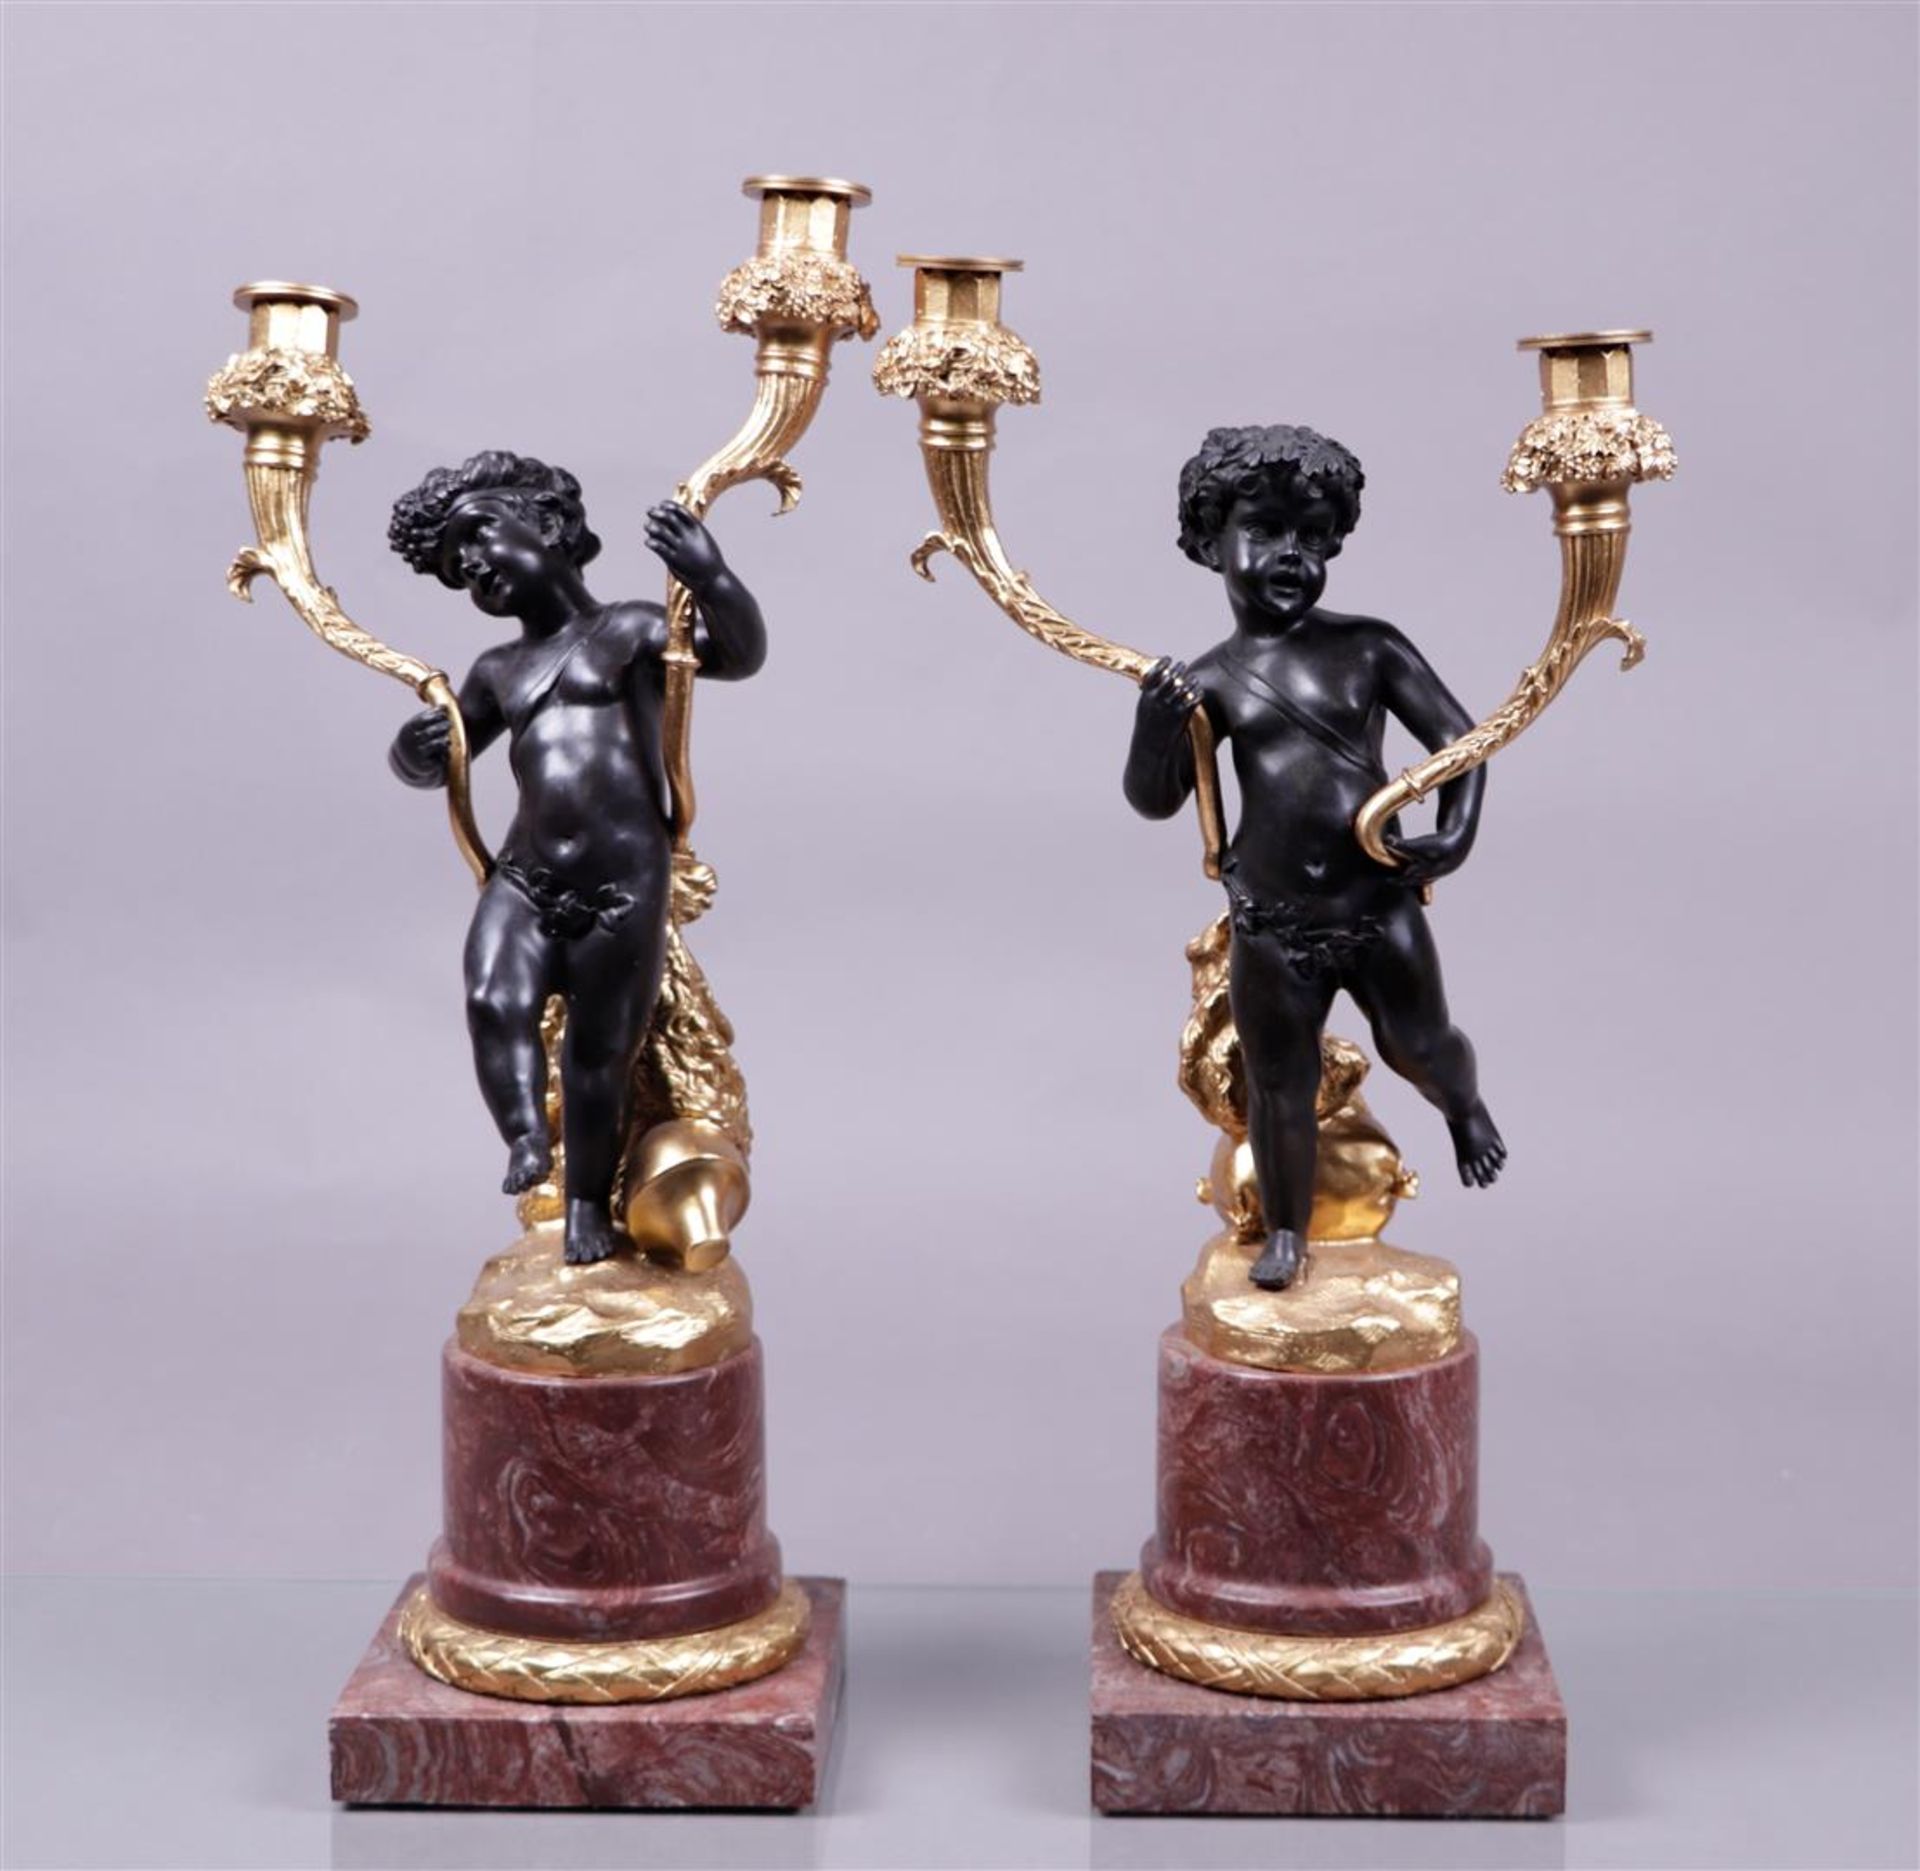 A set of second Empire style candlesticks on pink marble bases.
H.: 53 cm.